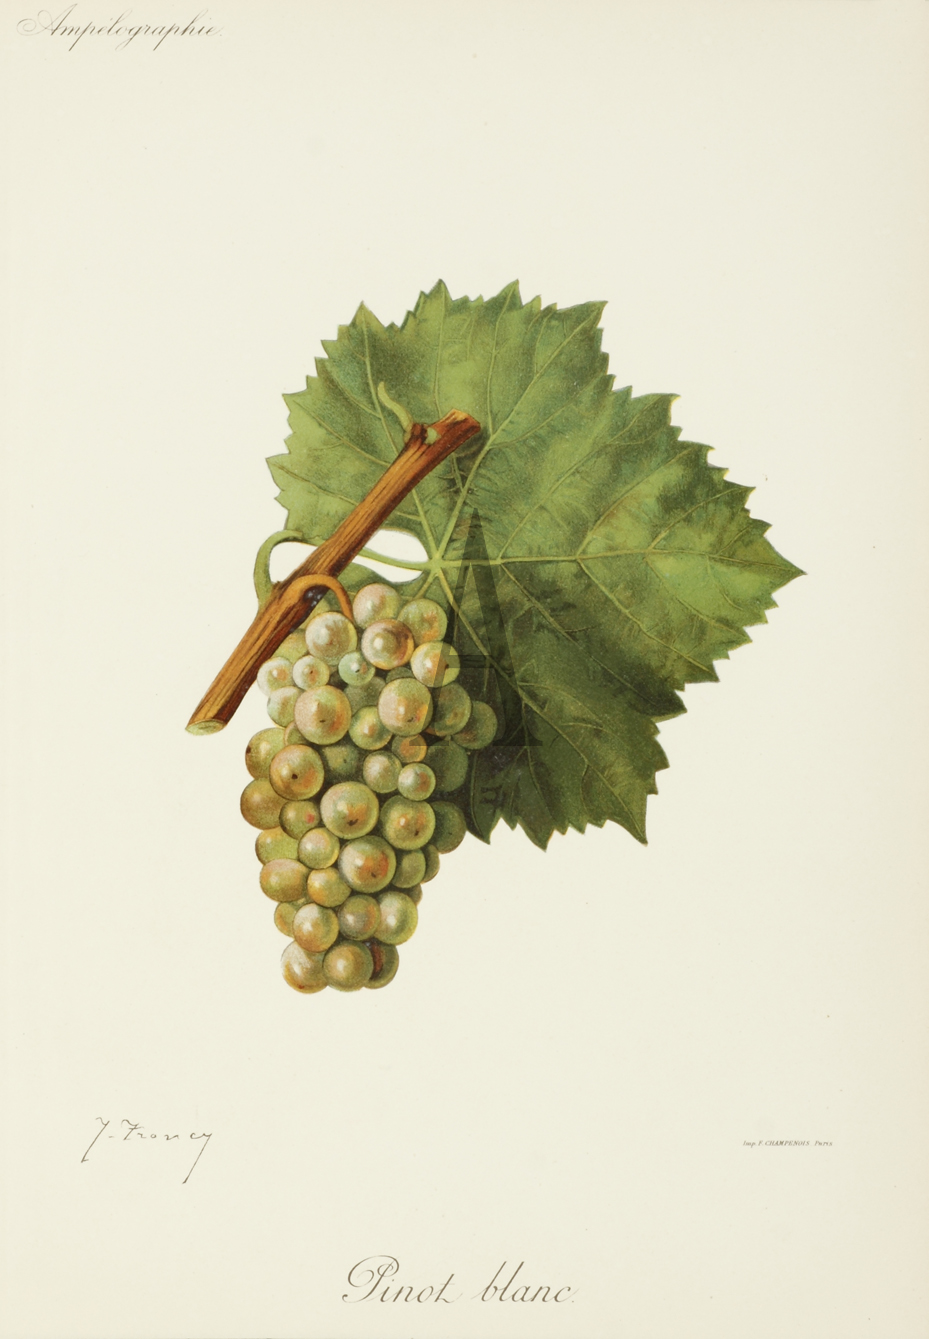 Pinot blanc - Antique Print from 1888